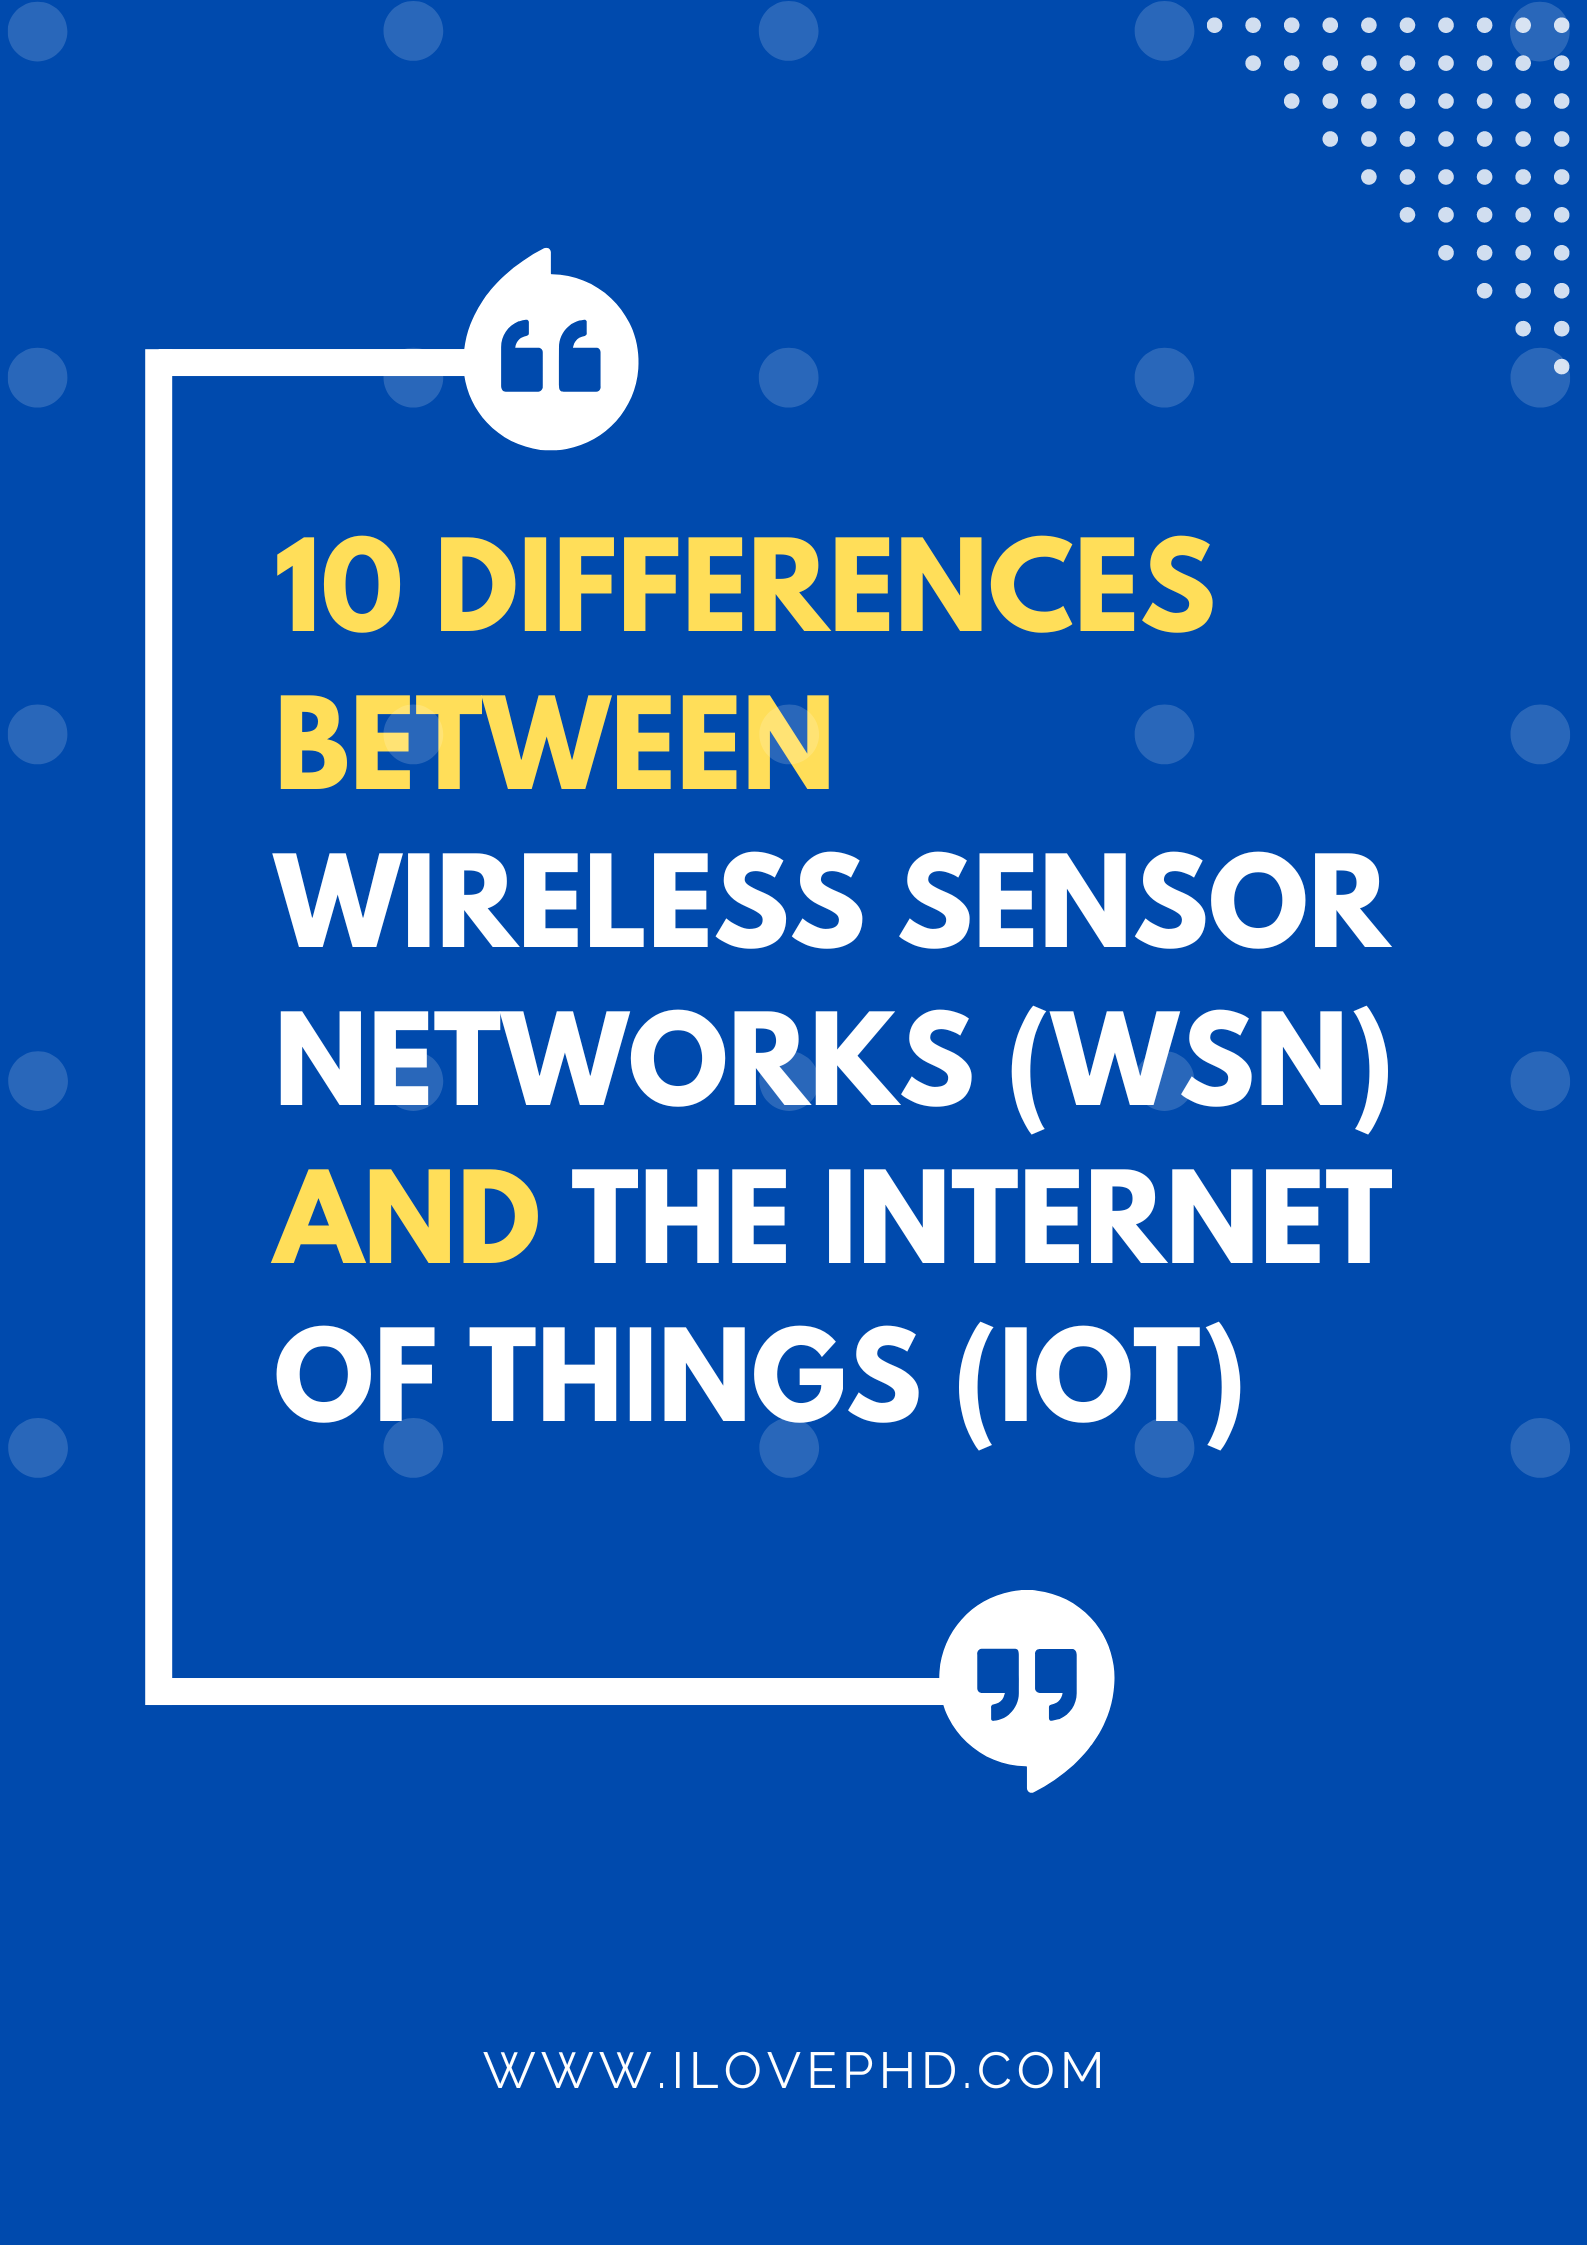 10 Differences Between Wireless Sensor Networks (WSN) and the Internet of Things (IoT)